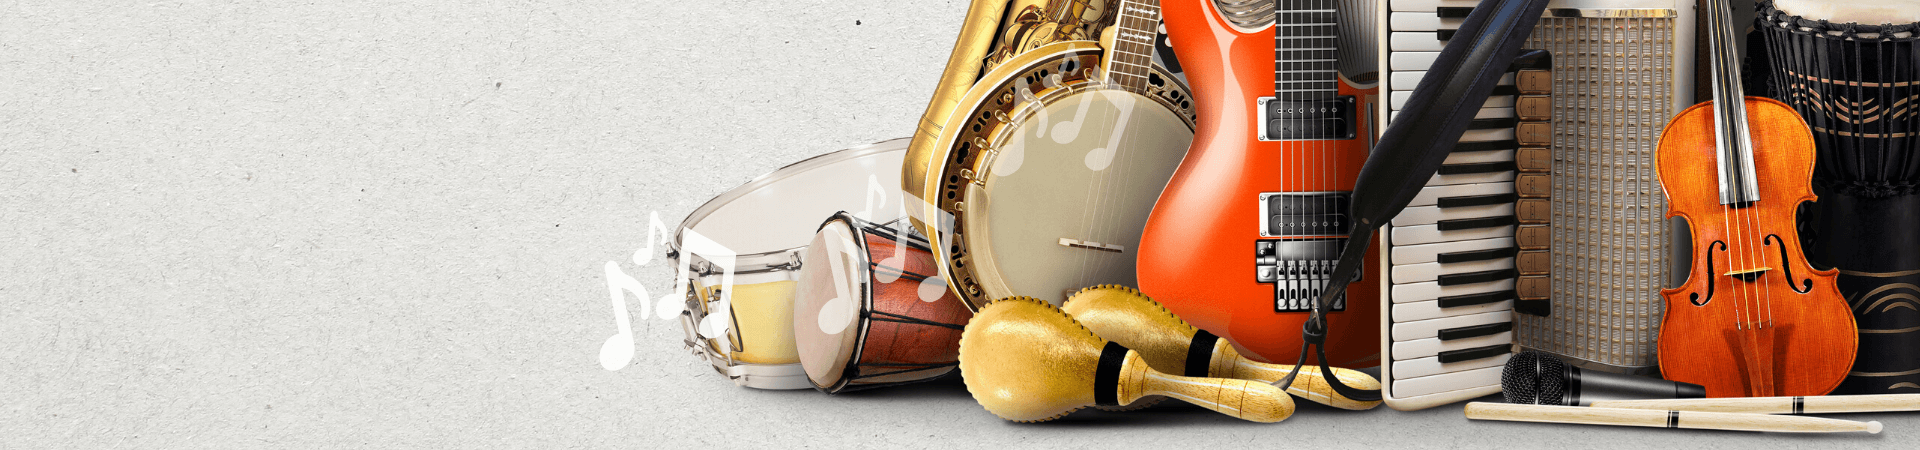 Dozens of different musical instruments, including drums, guitars, keyboards, violins, and more.